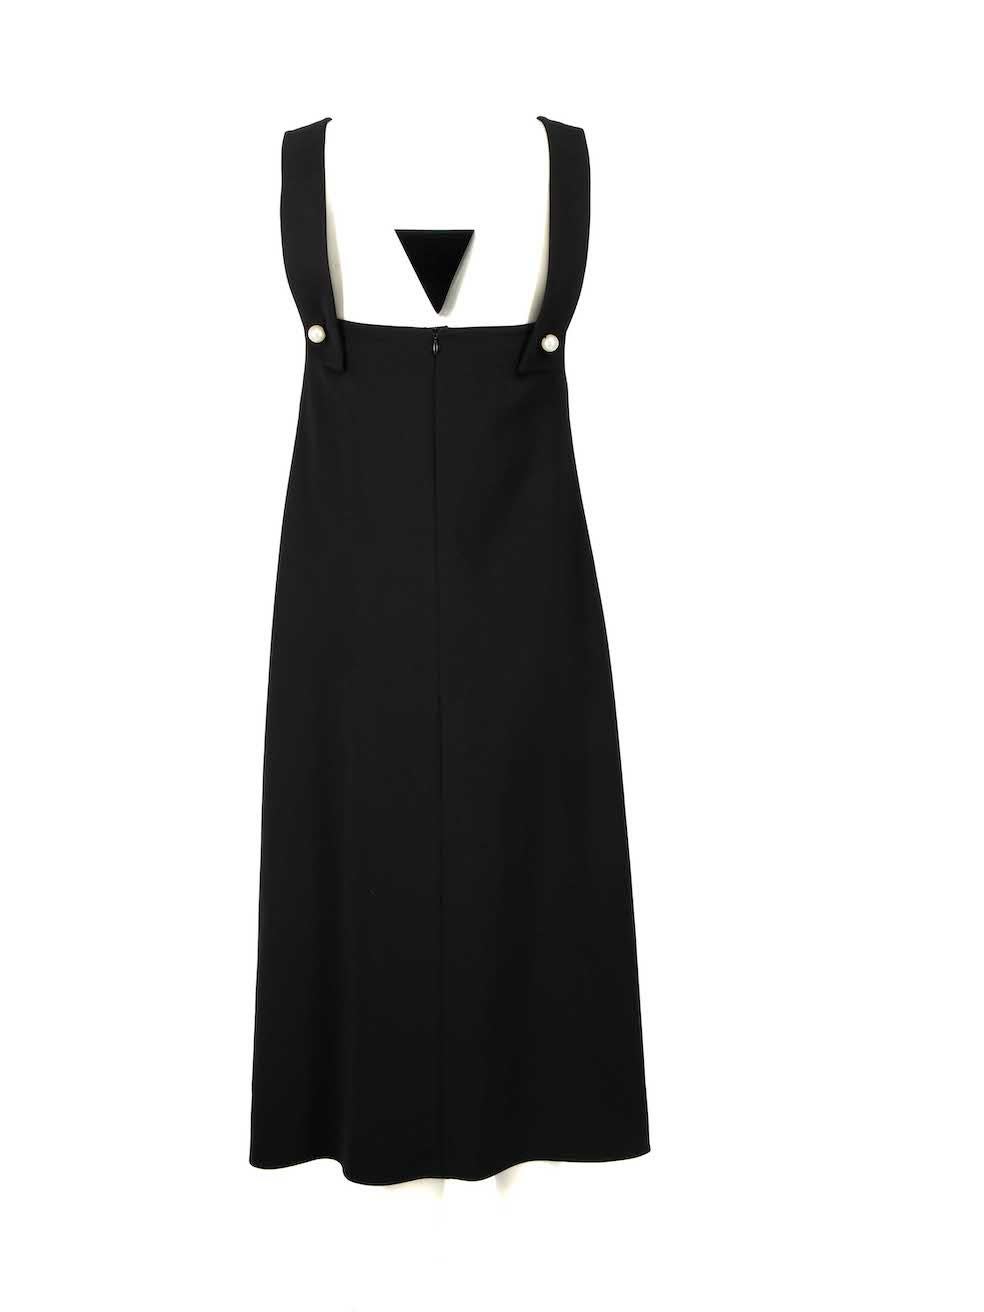 Alexis Black Sleeveless High Low Top Size XXS In Excellent Condition For Sale In London, GB